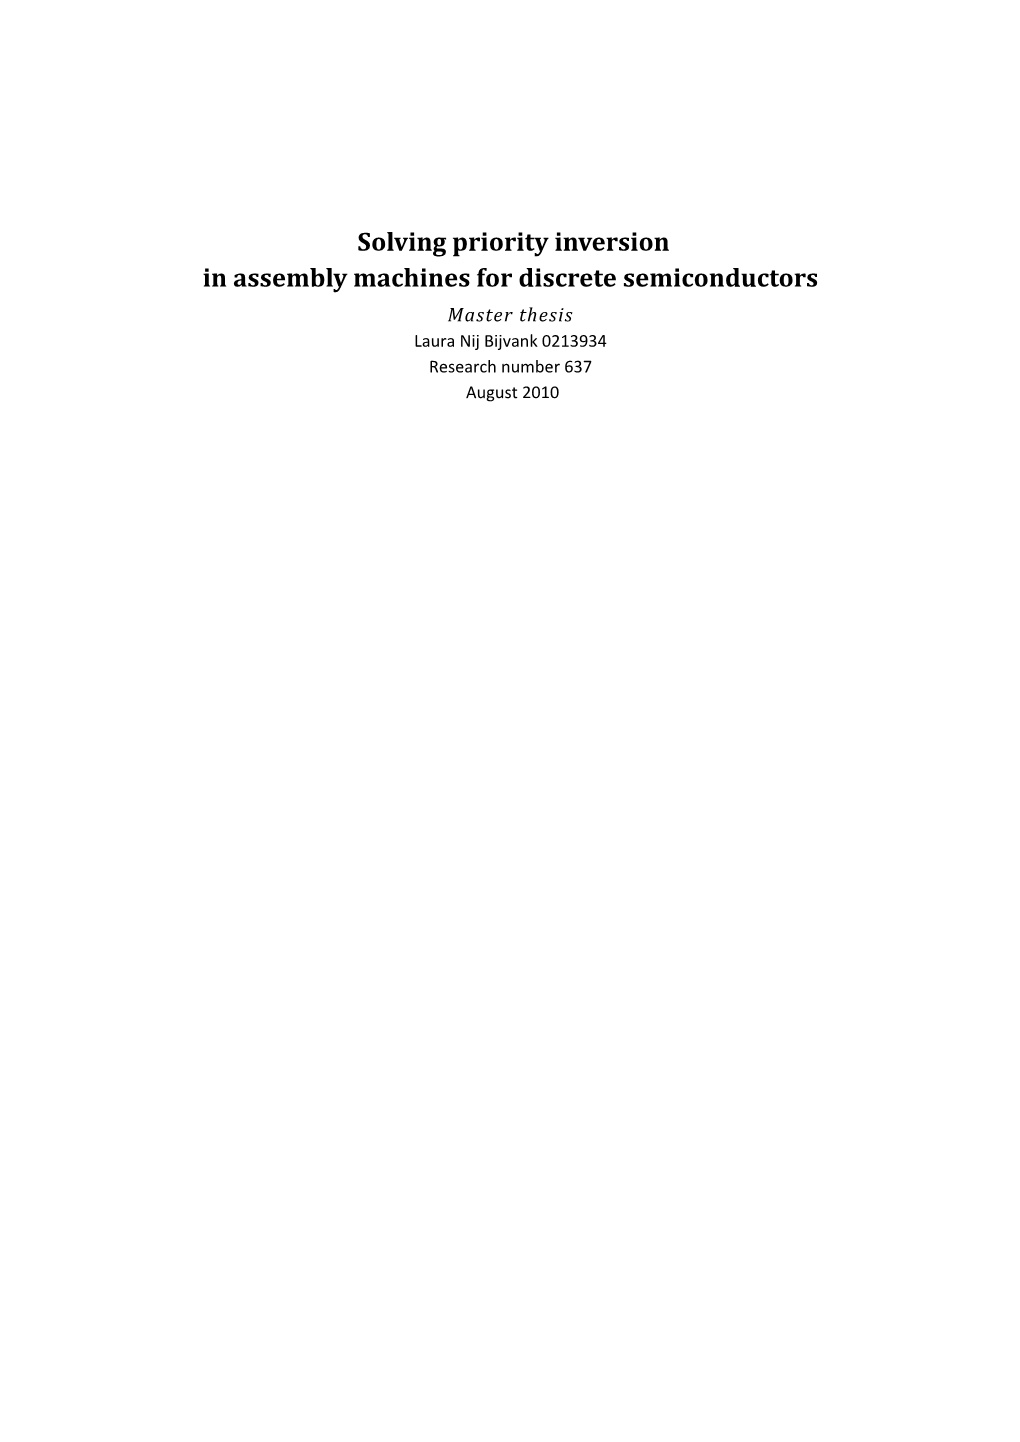 Solving Priority Inversion in Assembly Machines for Discrete Semiconductors Master Thesis Laura Nij Bijvank 0213934 Research Number 637 August 2010